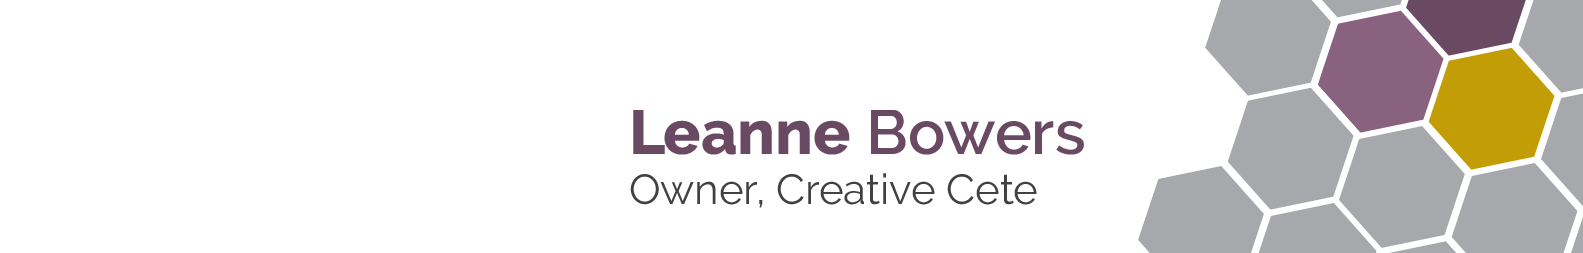 Leanne Bowers's profile banner